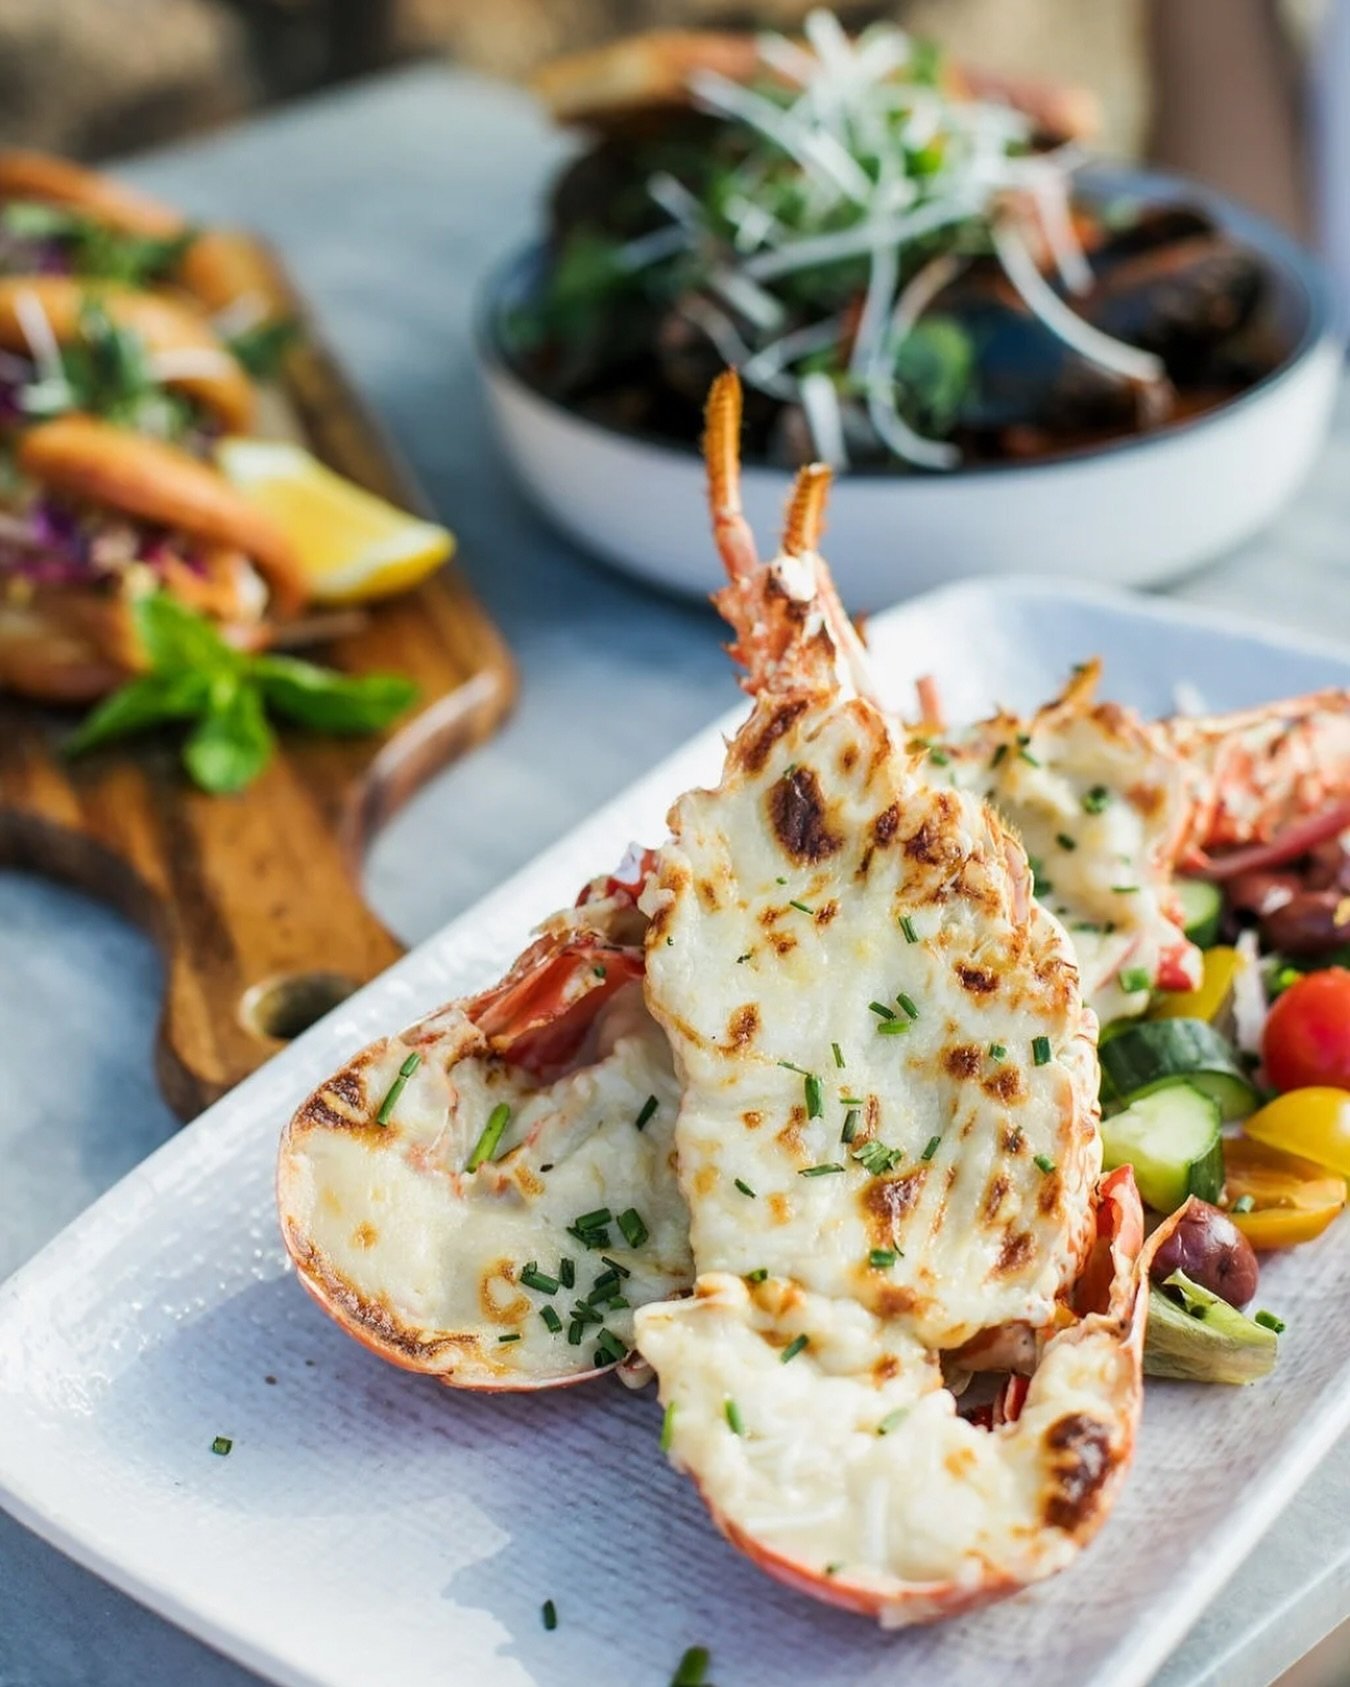 Indulge in the ultimate seafood experience with our delectable Lobster for Two! 🦞 Choose from our irresistible options to delight your tastebuds: natural, garlic butter or mornay sauce.

~ Tag someone you&rsquo;d share this somptueuse feast with! 

